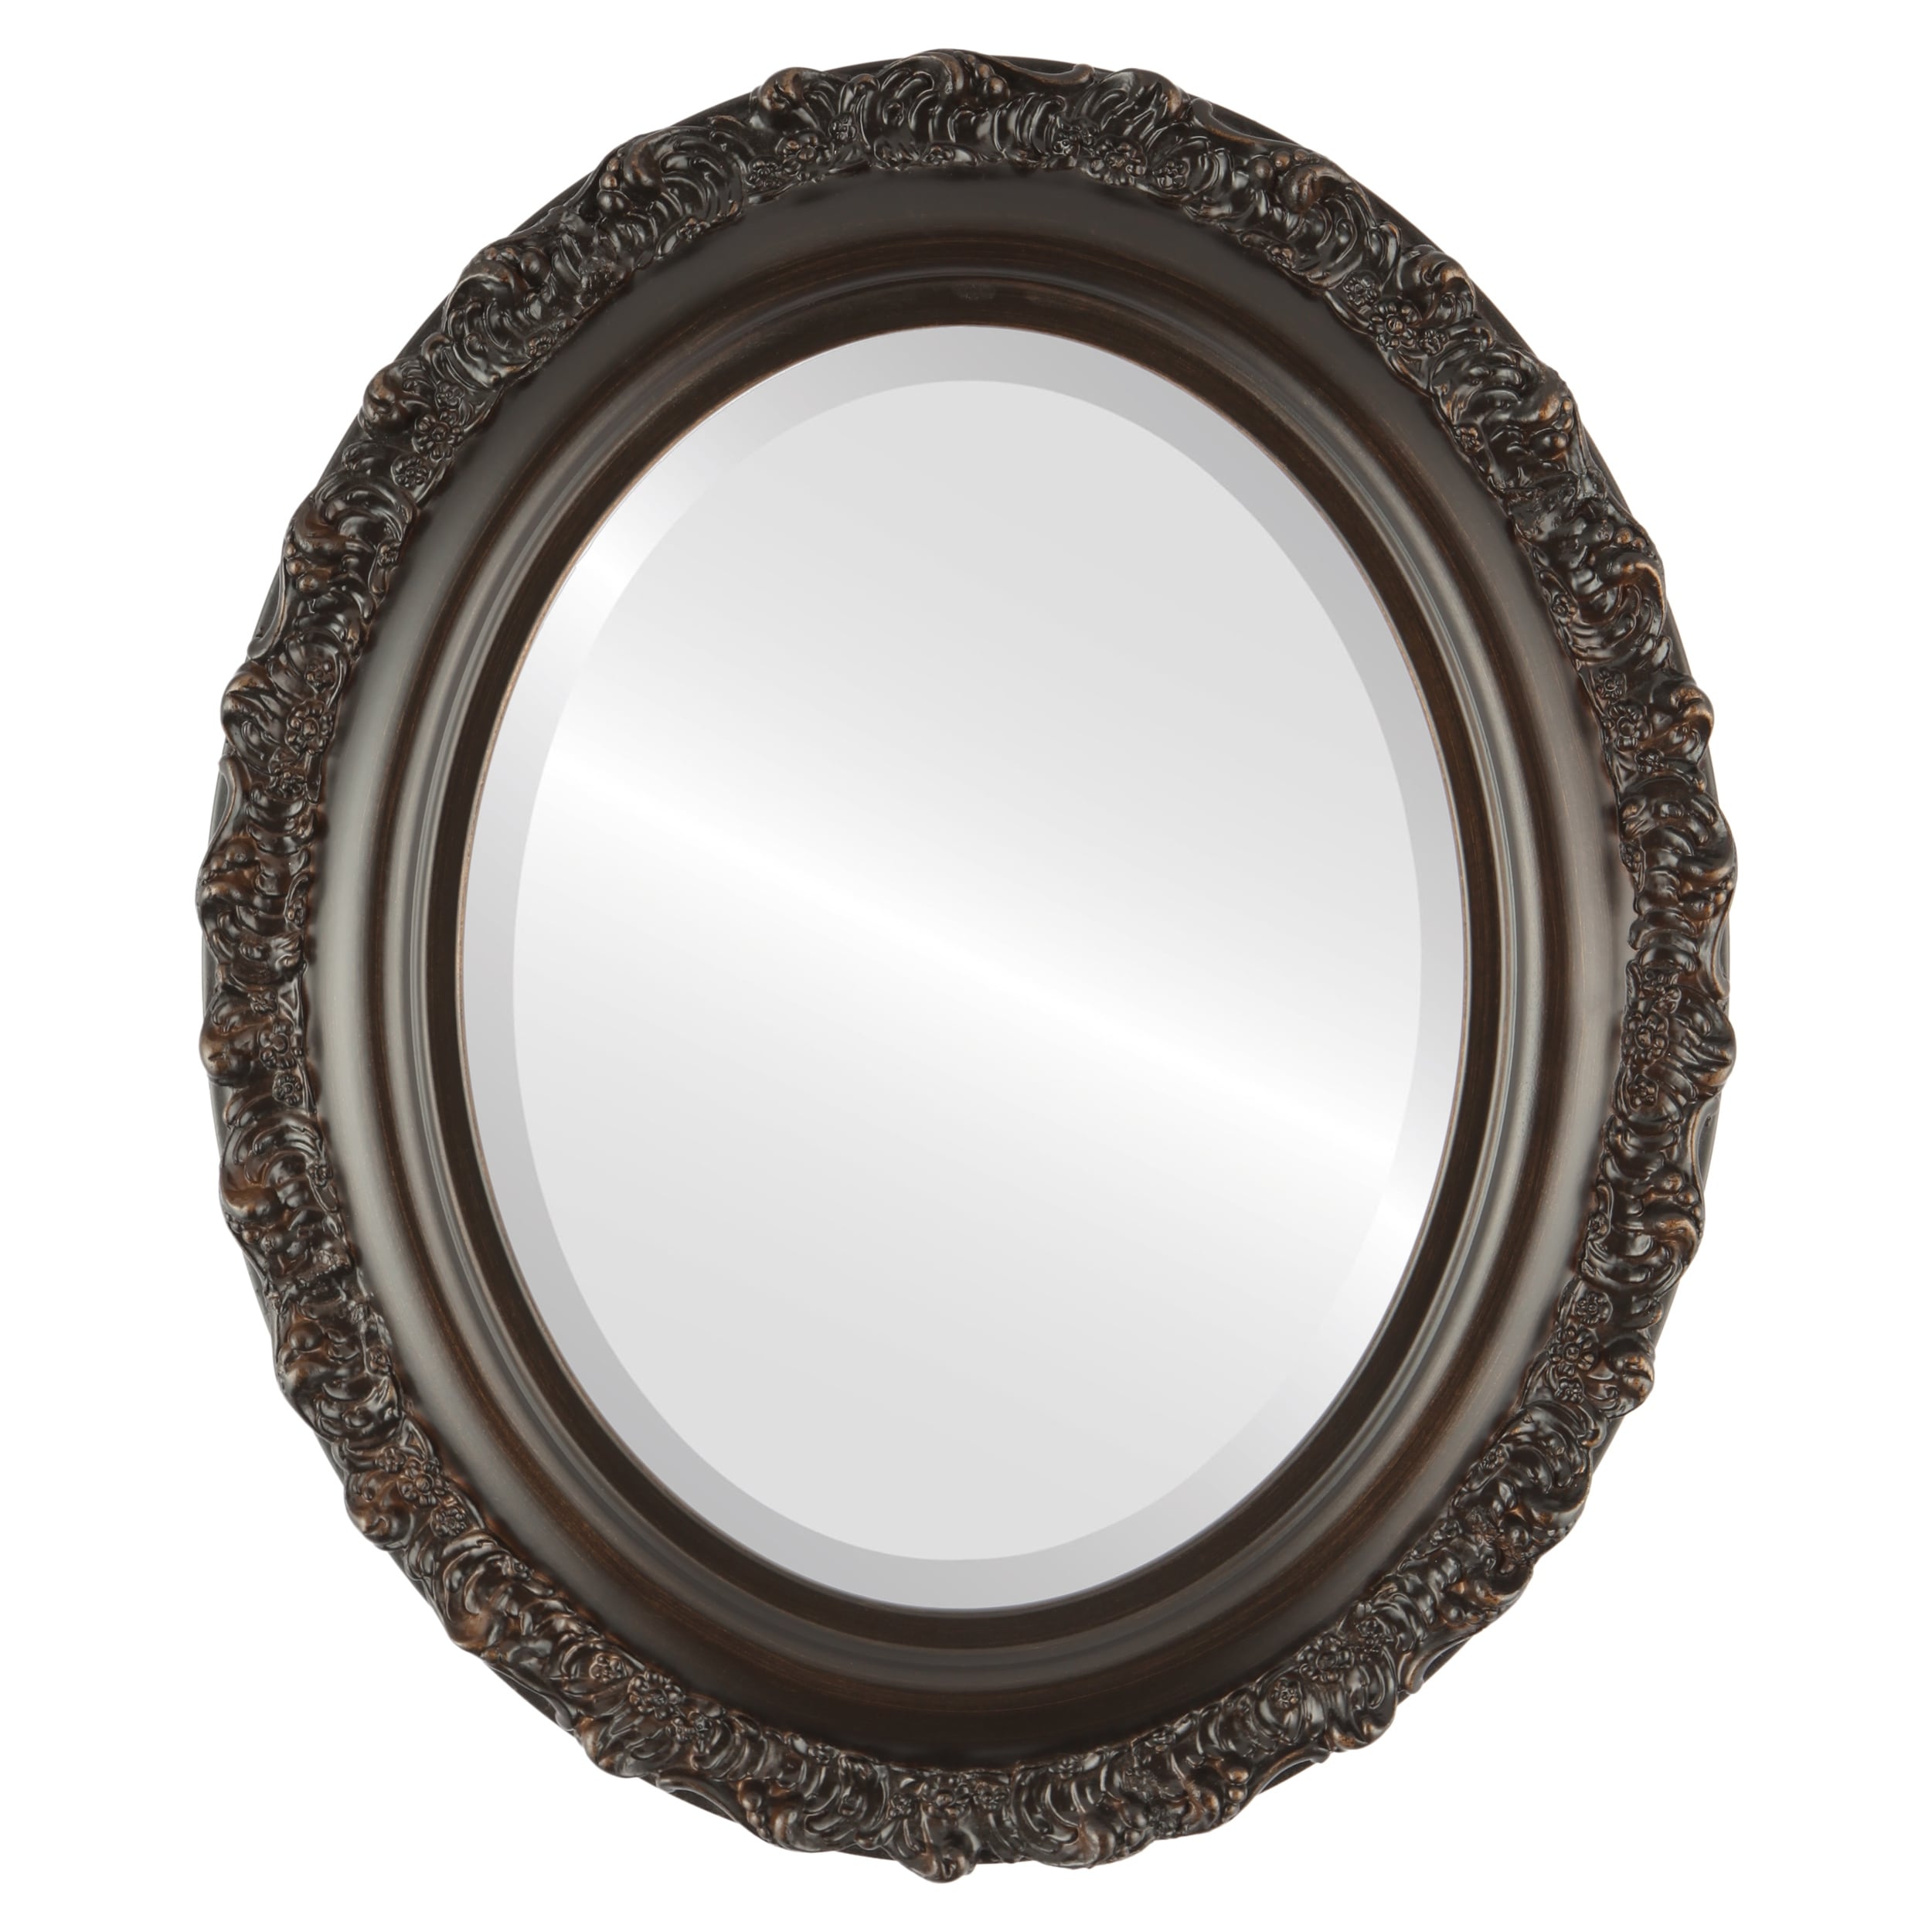 Venice Framed Oval Mirror in Rubbed Bronze Antique Bronze Bed Bath   Beyond 19471224